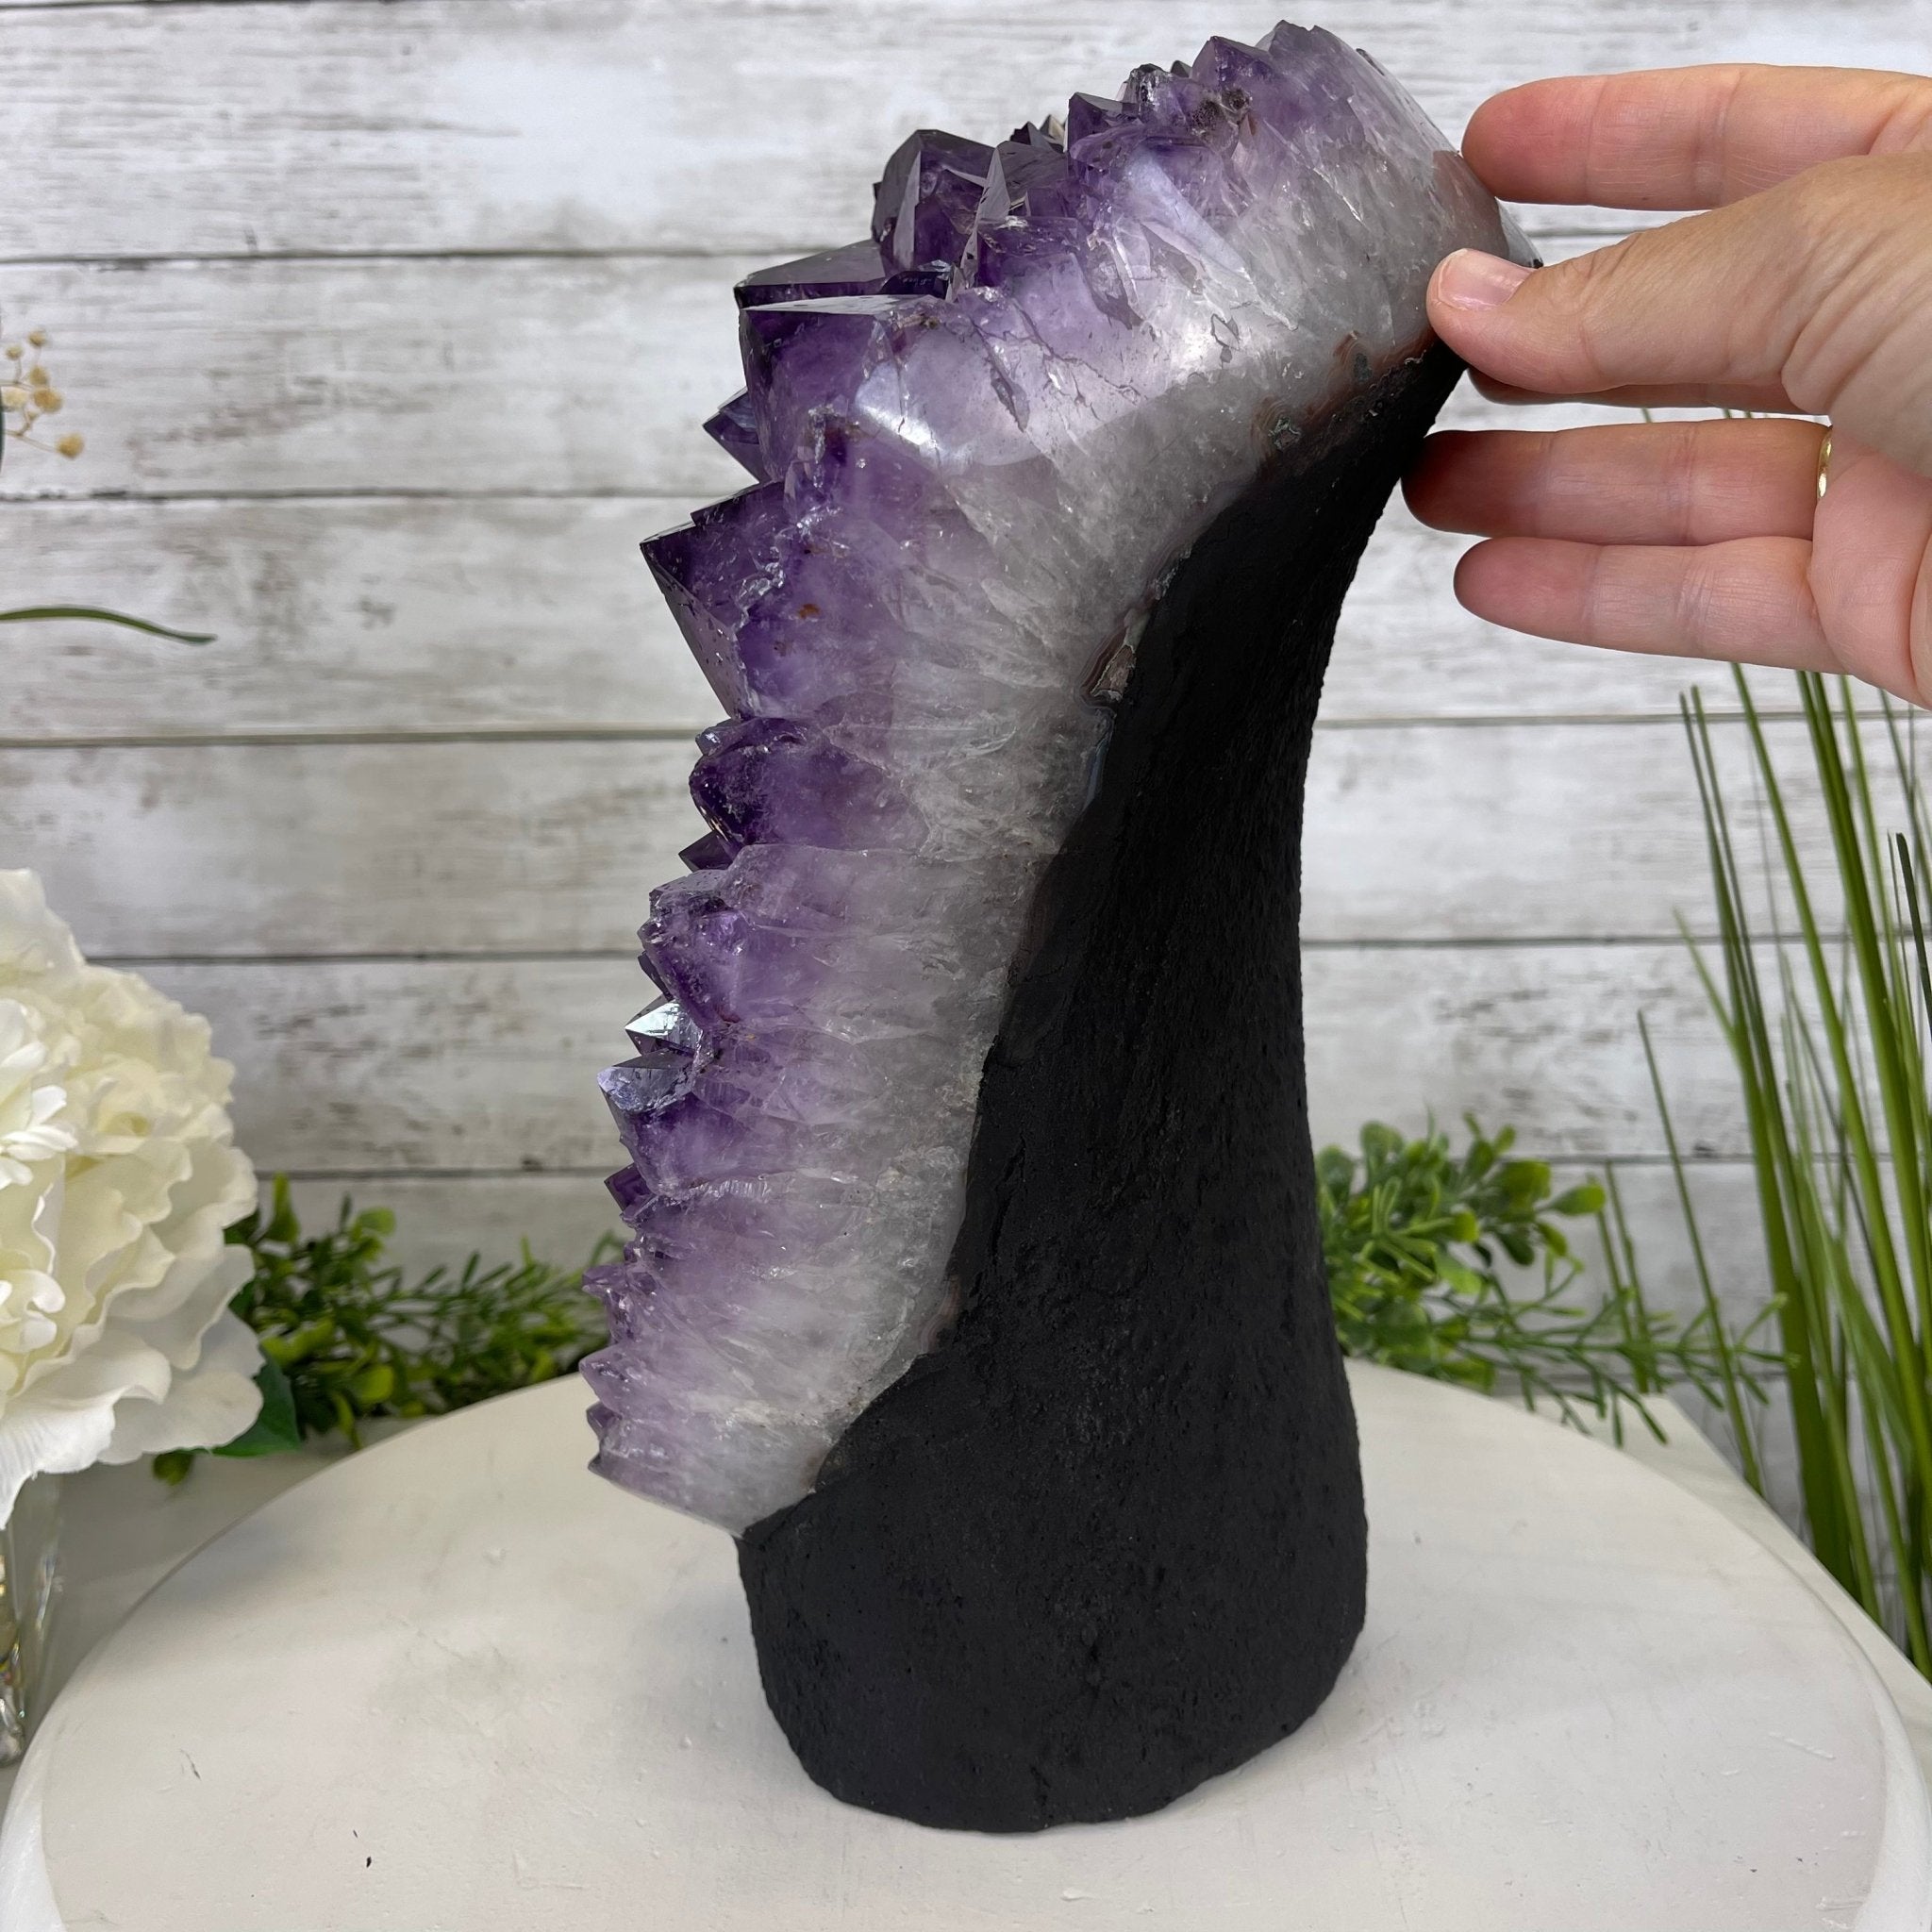 Extra Quality Amethyst Druse Cluster on Cement Base, 27.3 lbs and 12.4" Tall #5614-0072 - Brazil GemsBrazil GemsExtra Quality Amethyst Druse Cluster on Cement Base, 27.3 lbs and 12.4" Tall #5614-0072Clusters on Cement Bases5614-0072